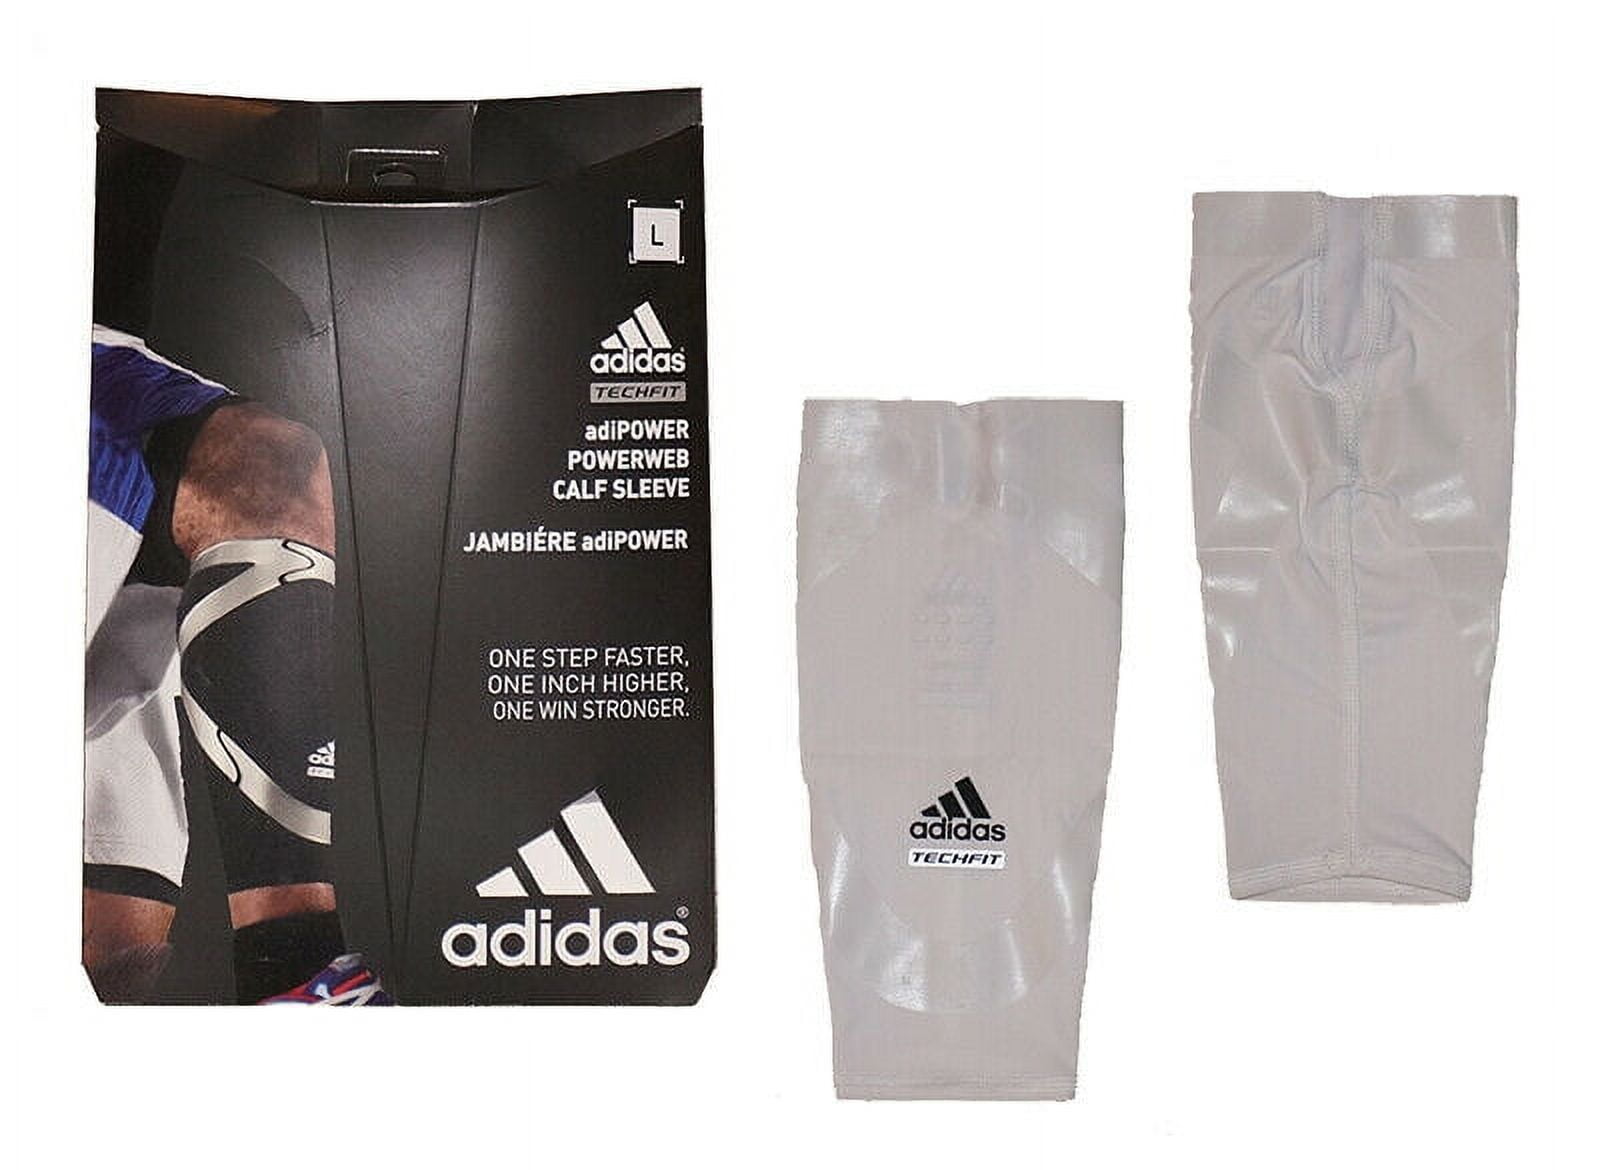 adidas 1-Pair Men's Compression Calf Sleeves - Green White & Ble